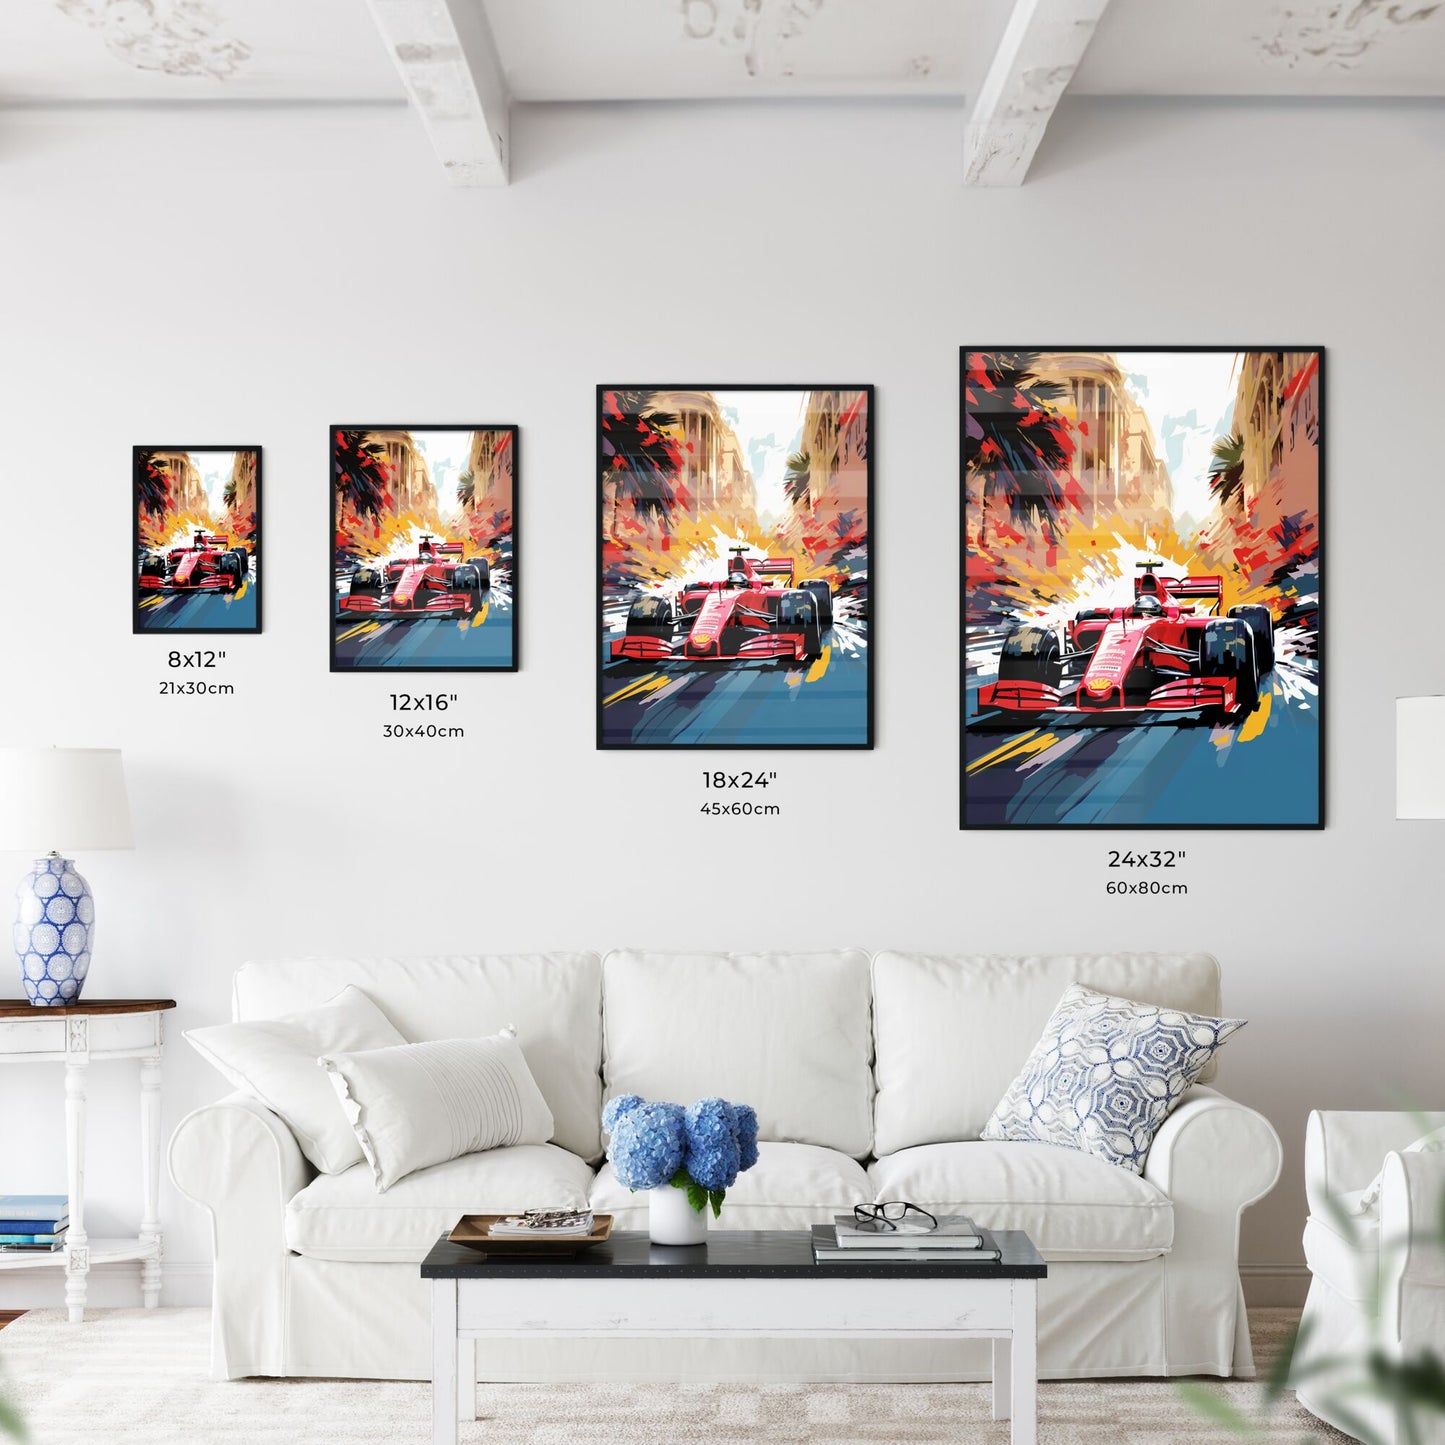 Red Race Car On A Road Art Print Default Title